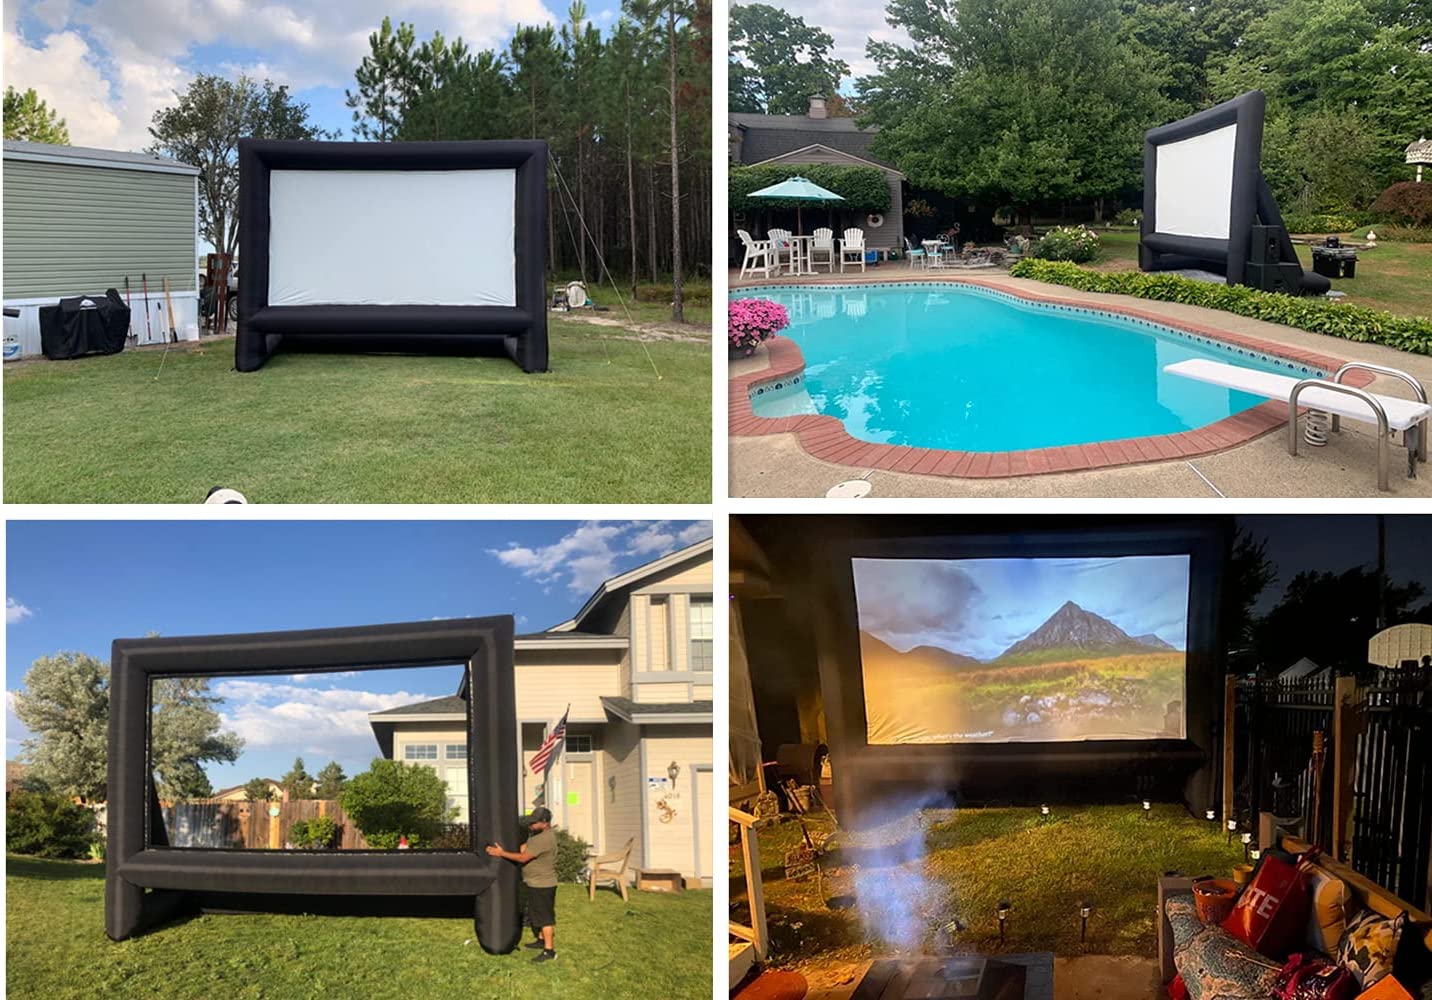 20' Inflatable Outdoor Projector Movie Screen - Package with Rope, Blower + Tent Stakes - Great for Outdoor Backyard Pool Fun